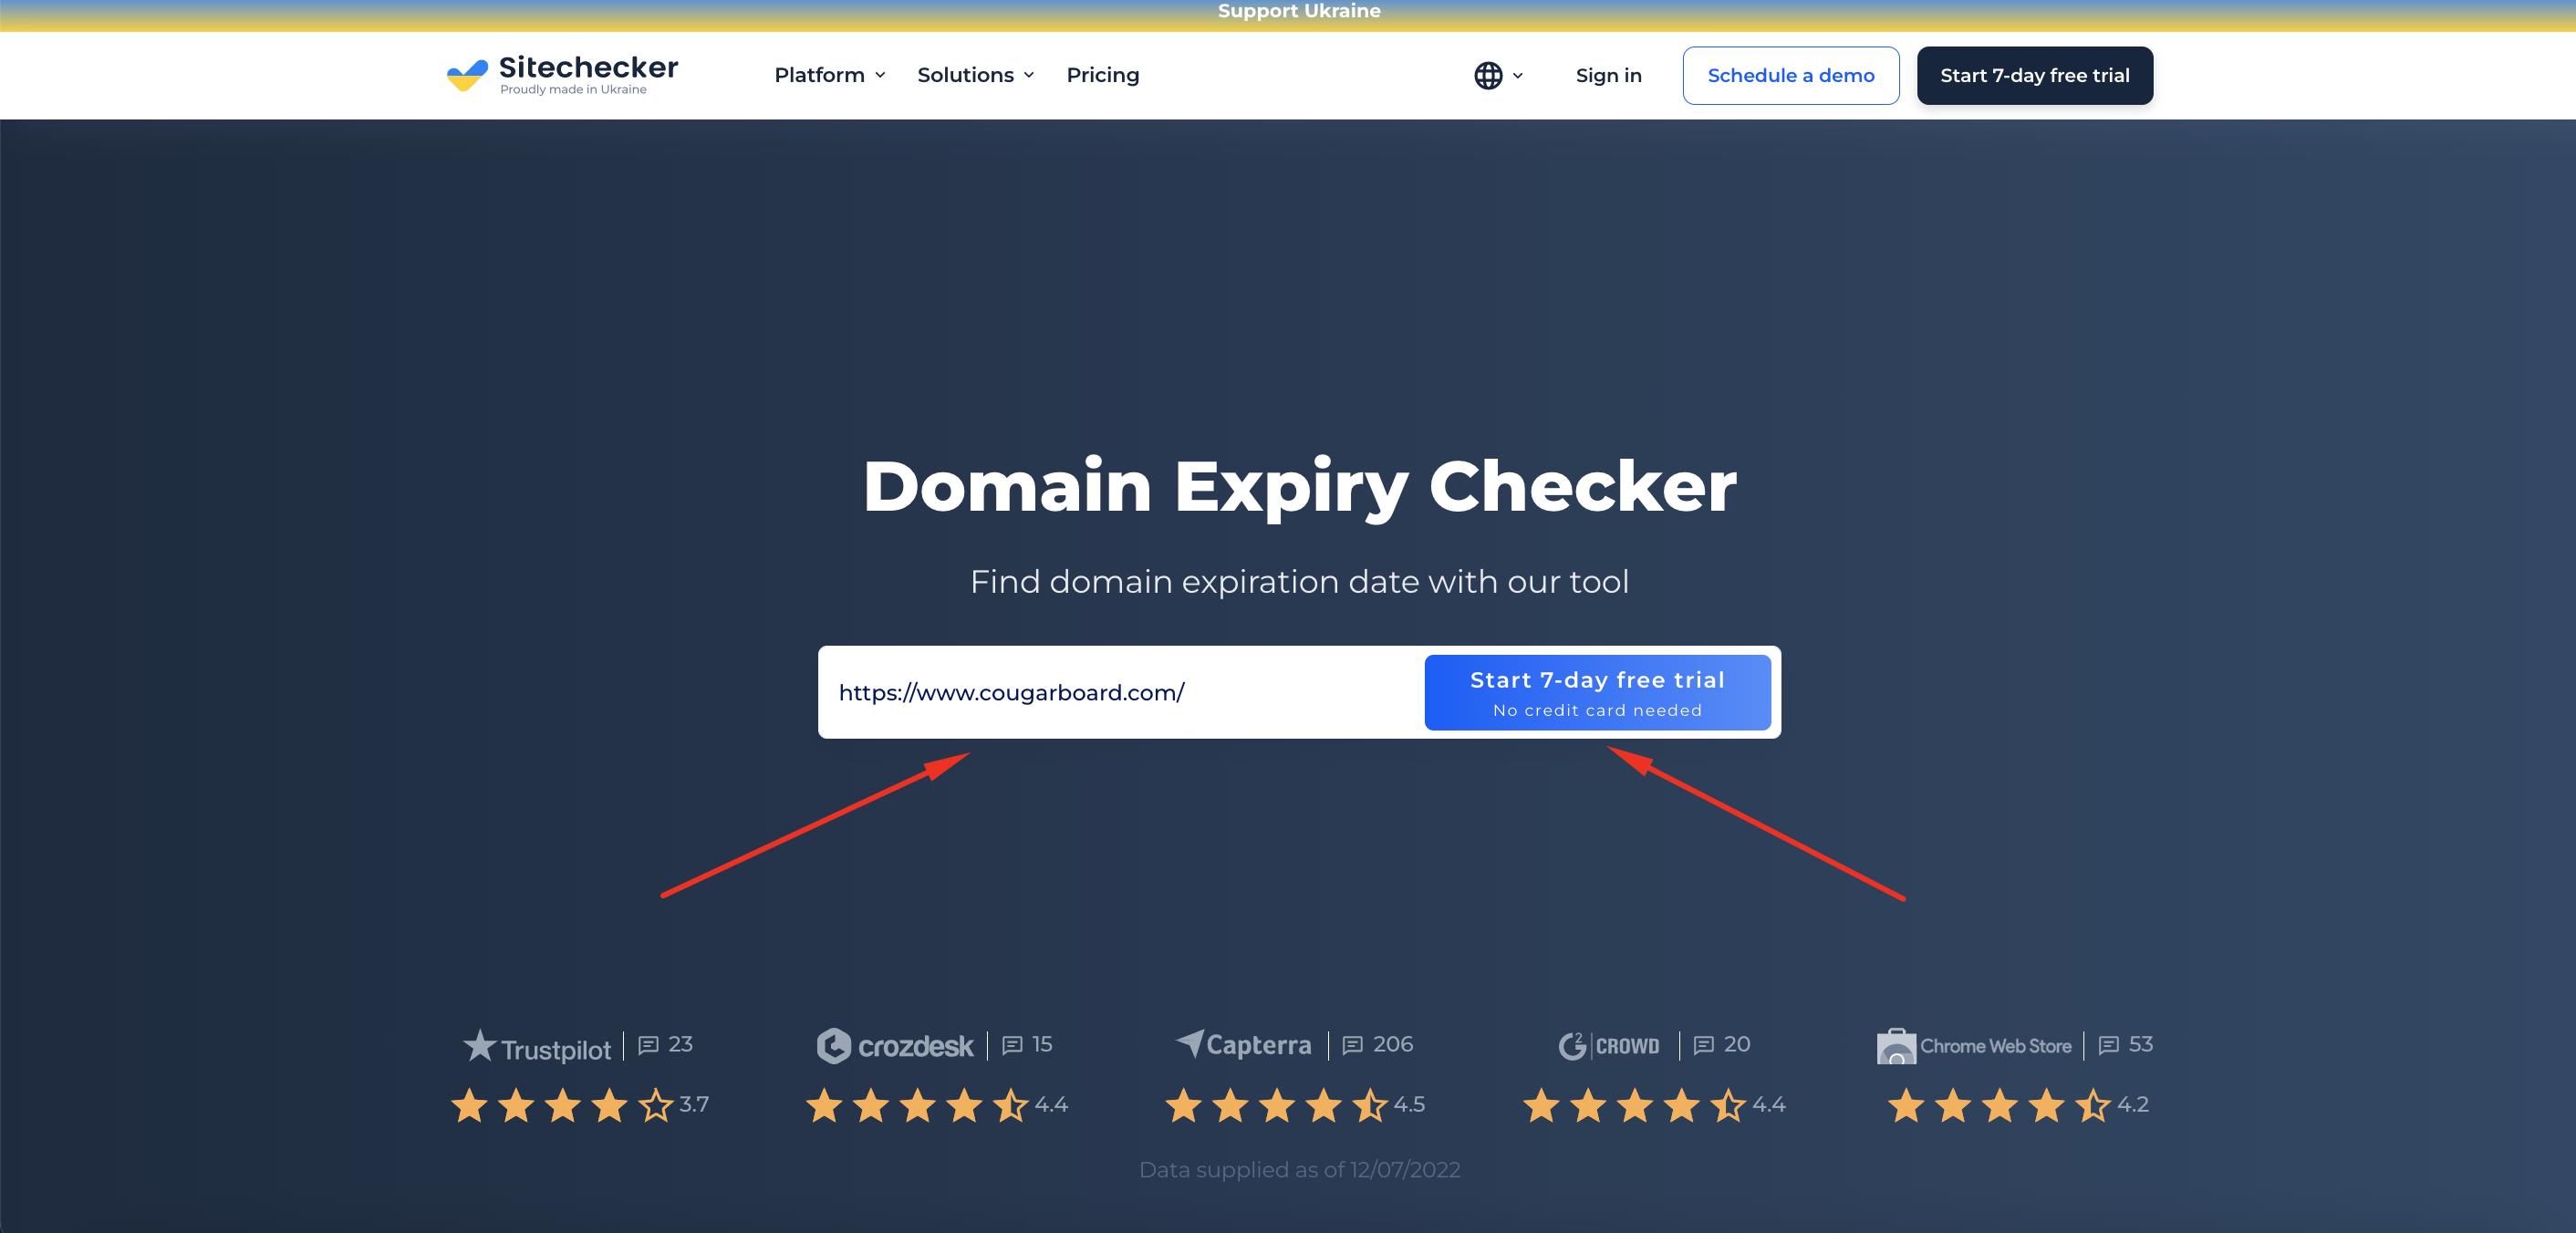 Check the domain expiry with our domain expiry checker